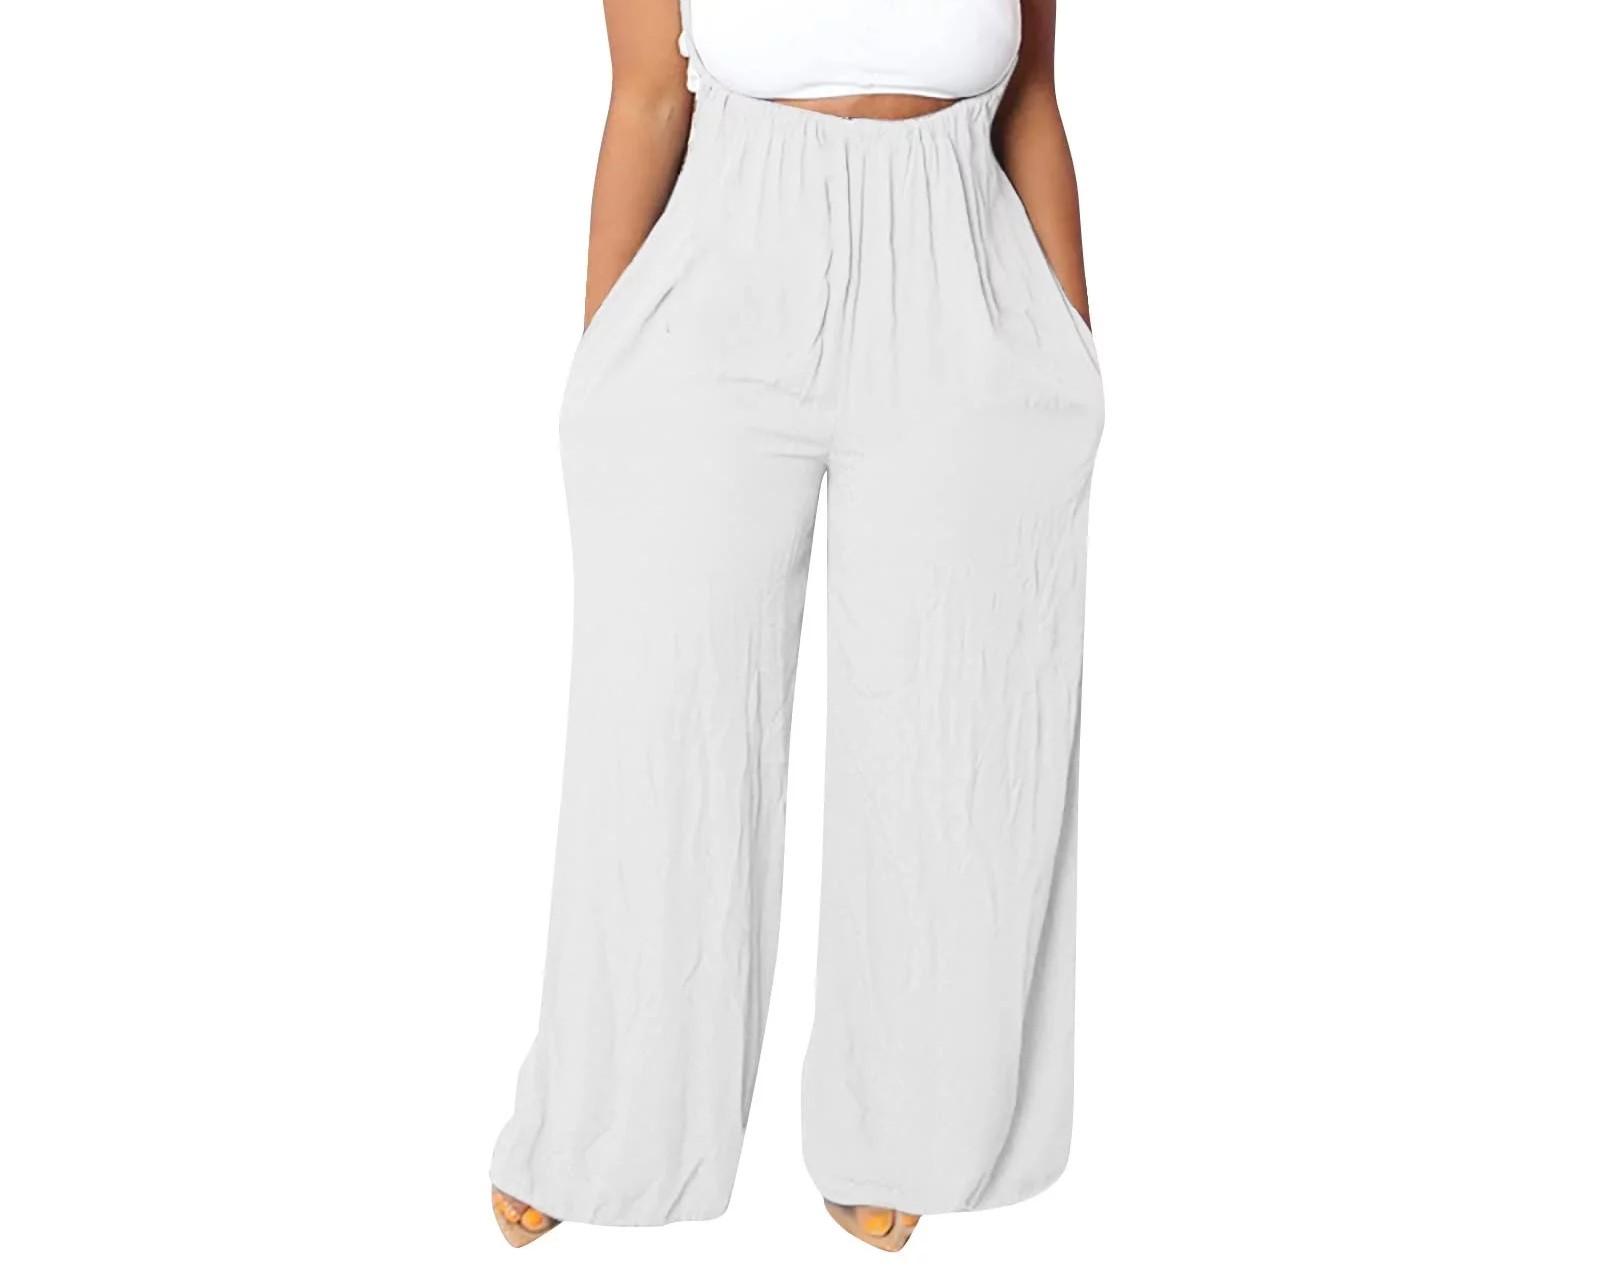 Women's Opinions On The Rising Trend Of Wide Leg Pants And Feminine Jumpsuits